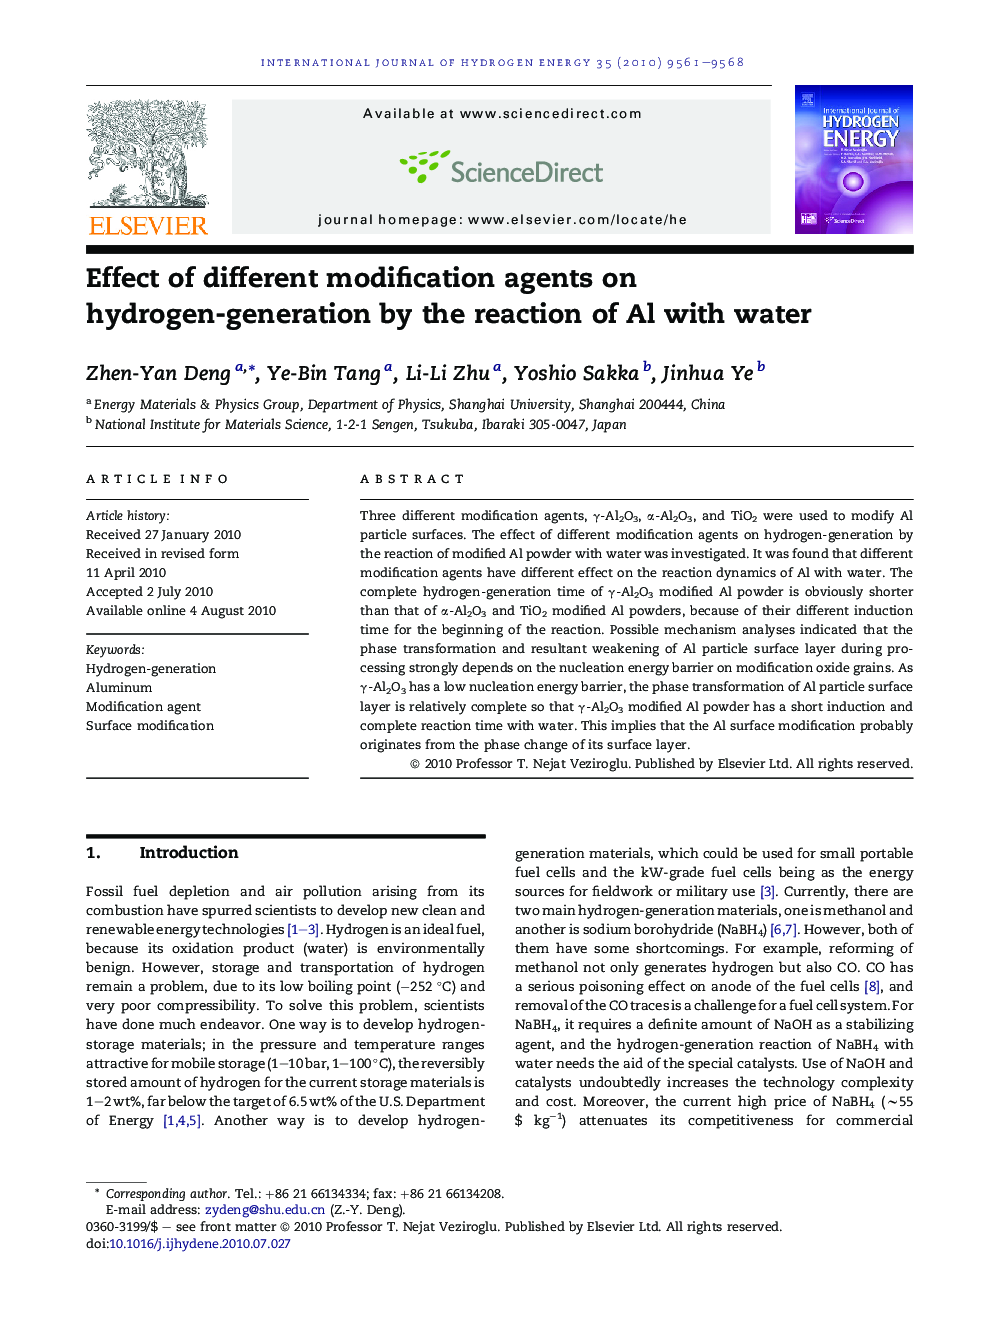 Effect of different modification agents on hydrogen-generation by the reaction of Al with water